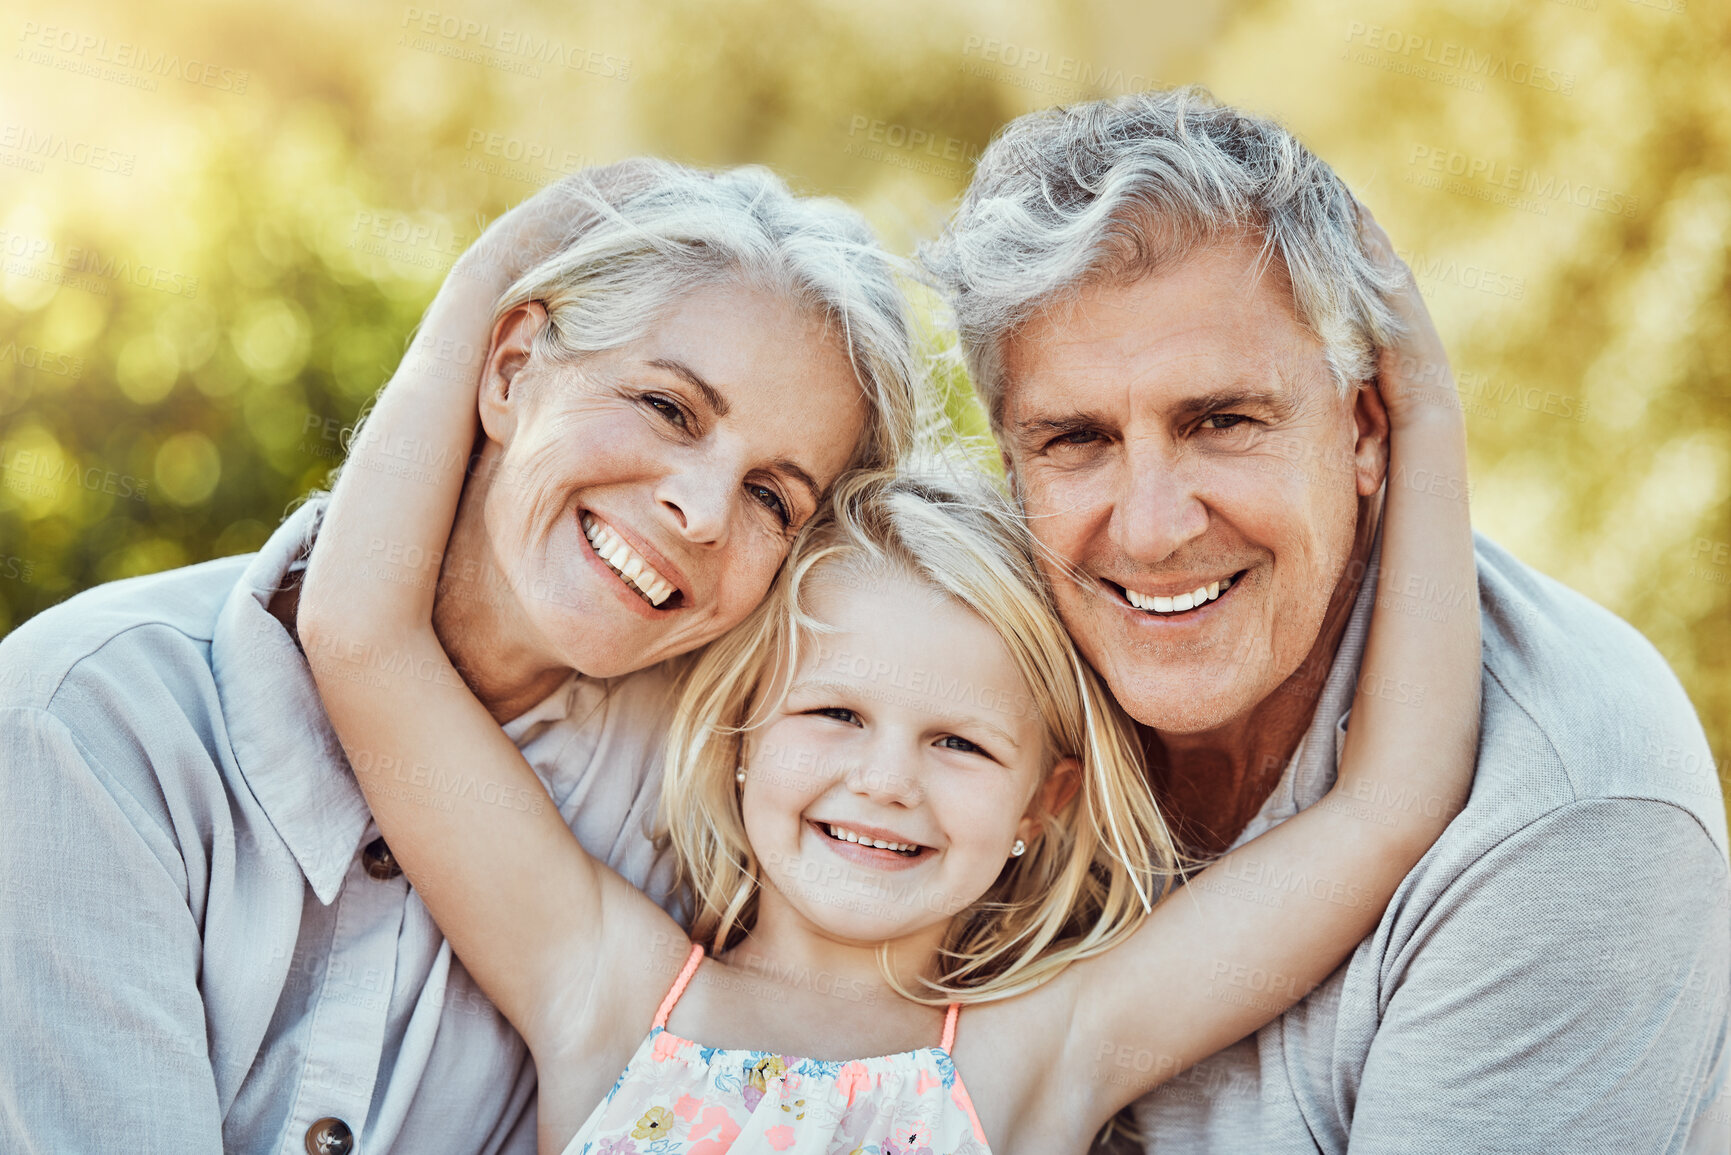 Buy stock photo Grandparents, park and child hug portrait with a young girl and elderly people with love and smile. Care, bonding together and nature of a family feeling happy with kid and elderly grandparent